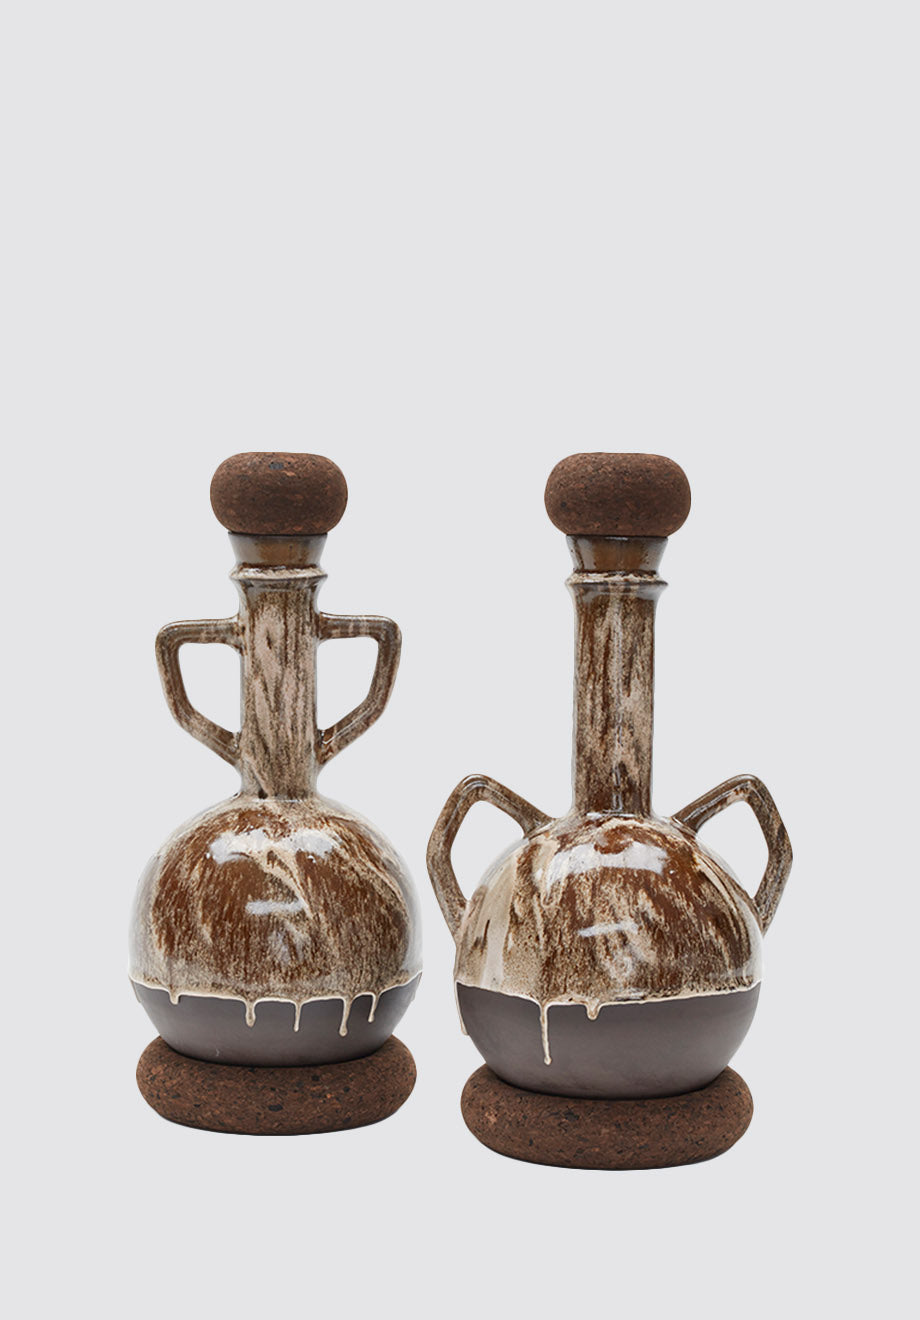 Round Black Clay and Cork Vases, with Handles